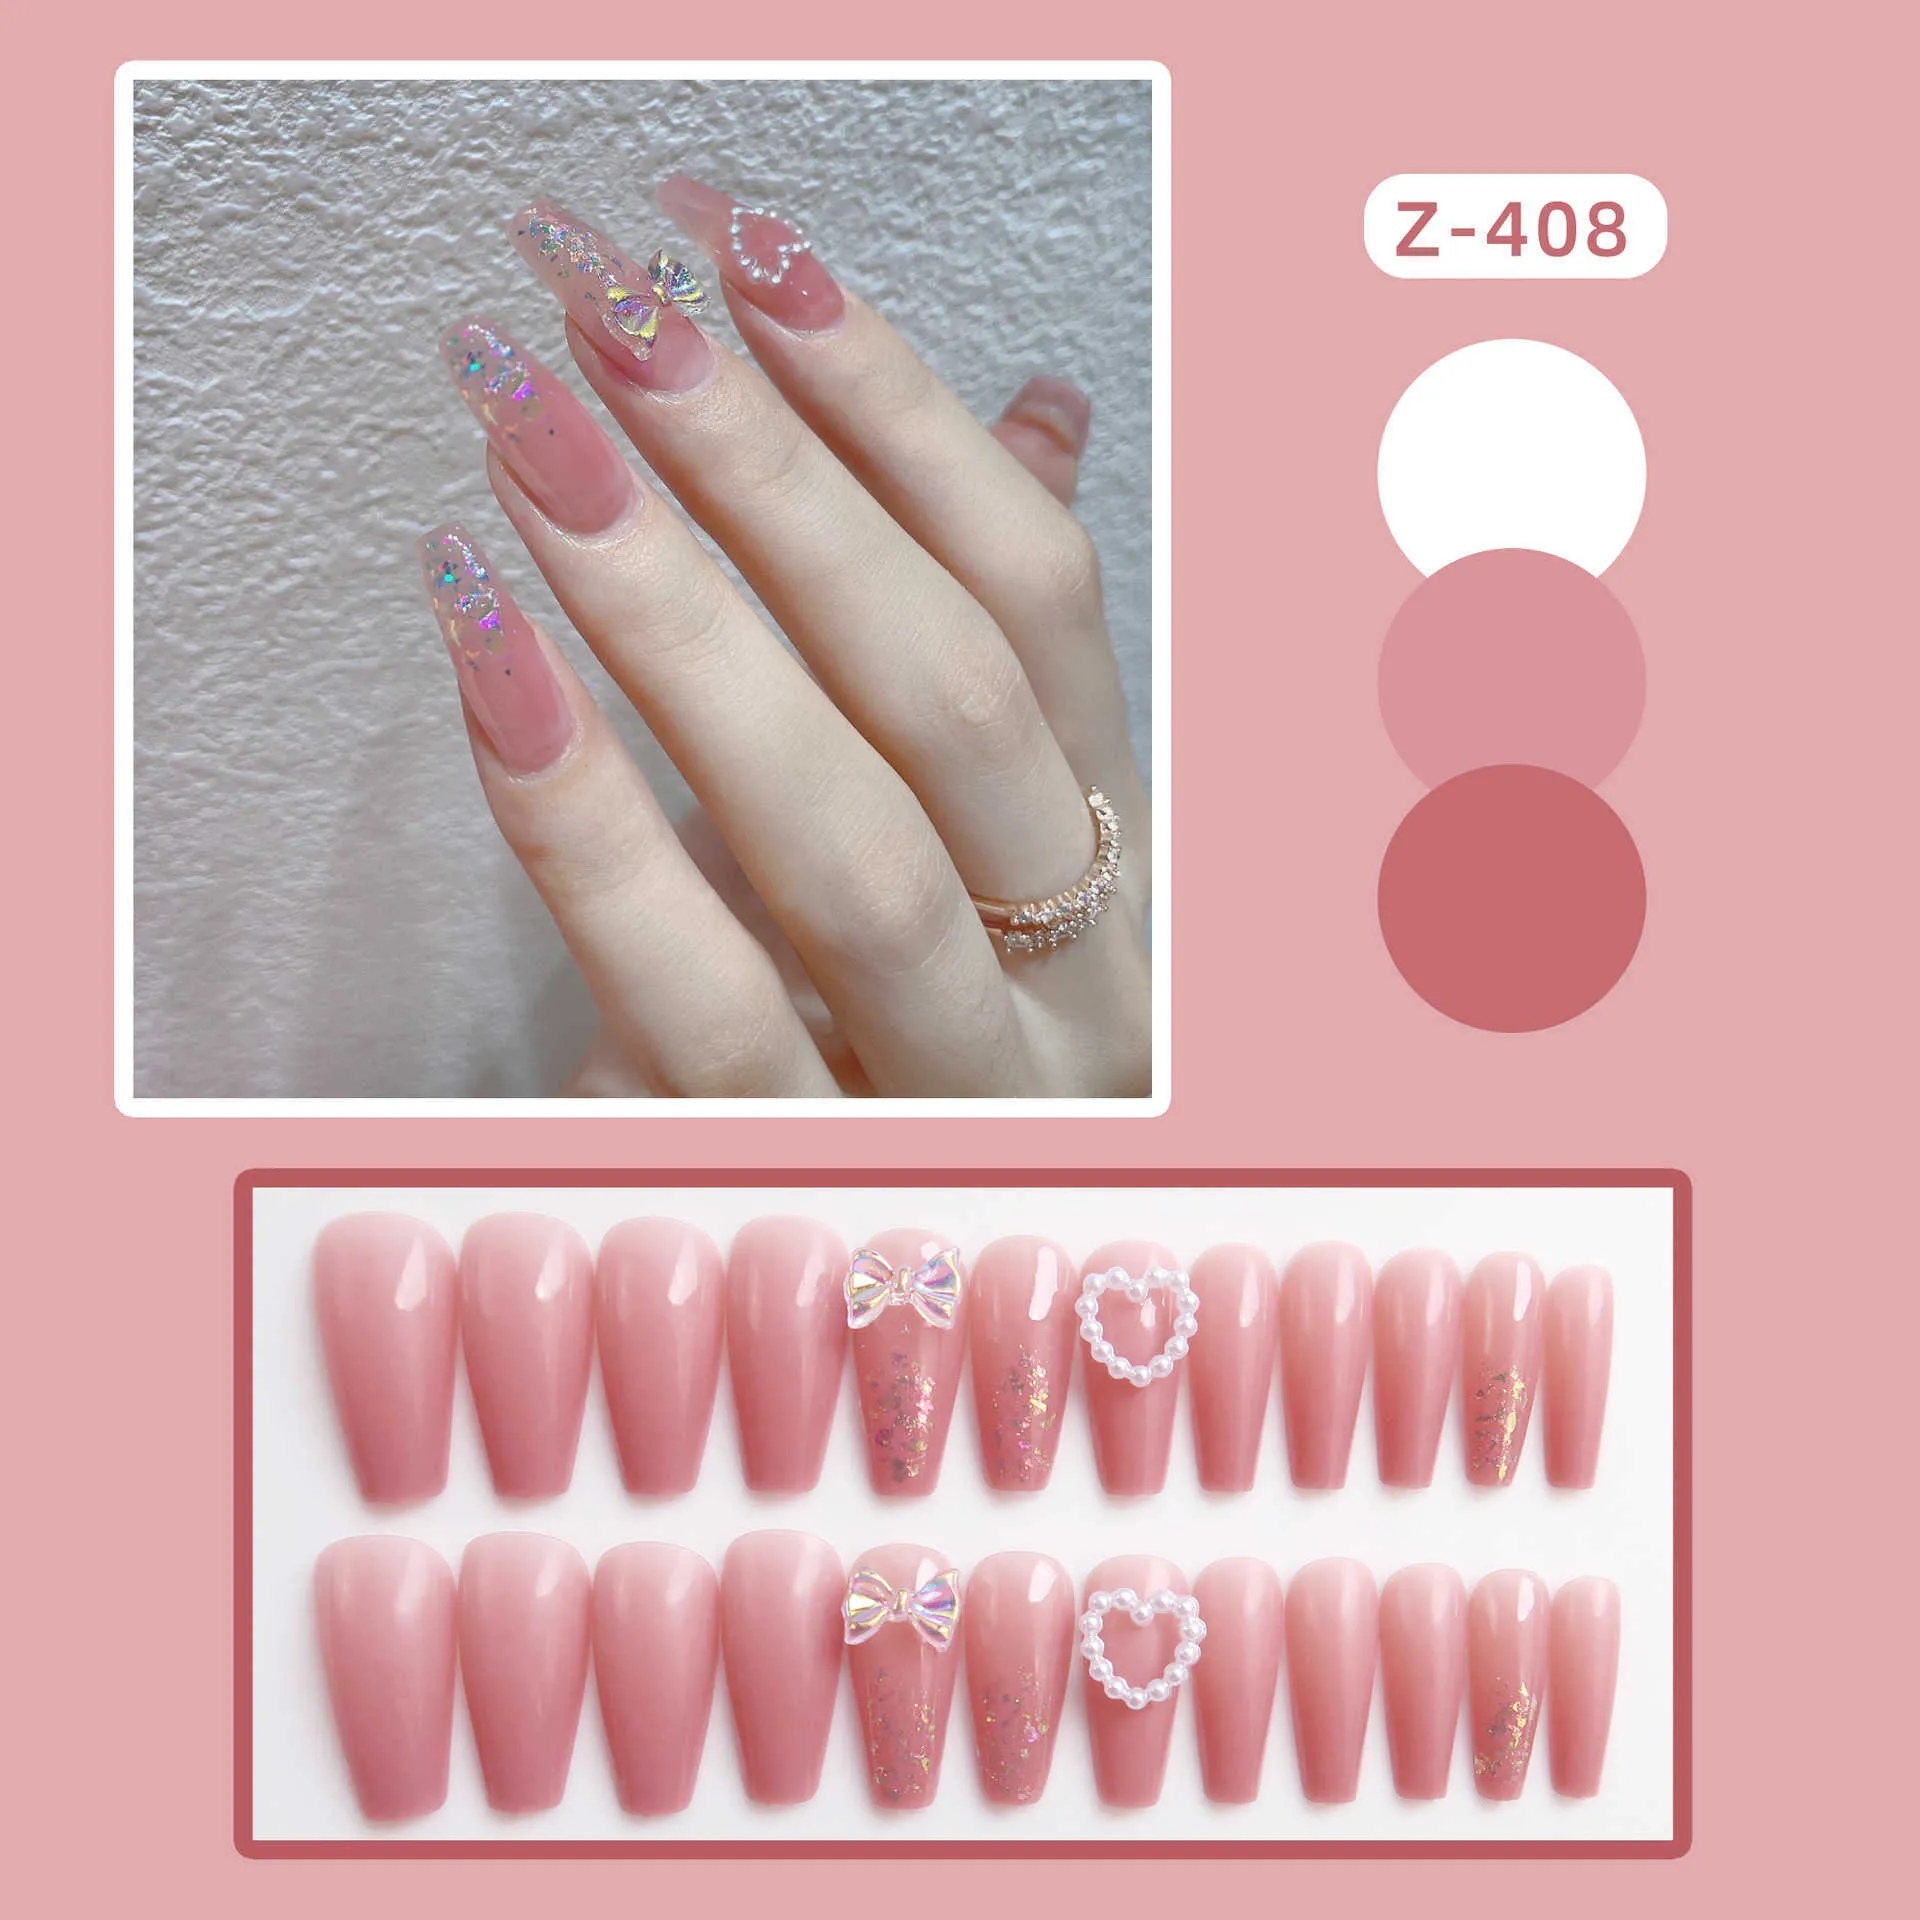 kmart nails pt?, the oxx studio's nails are becoming my favorite press... |  TikTok